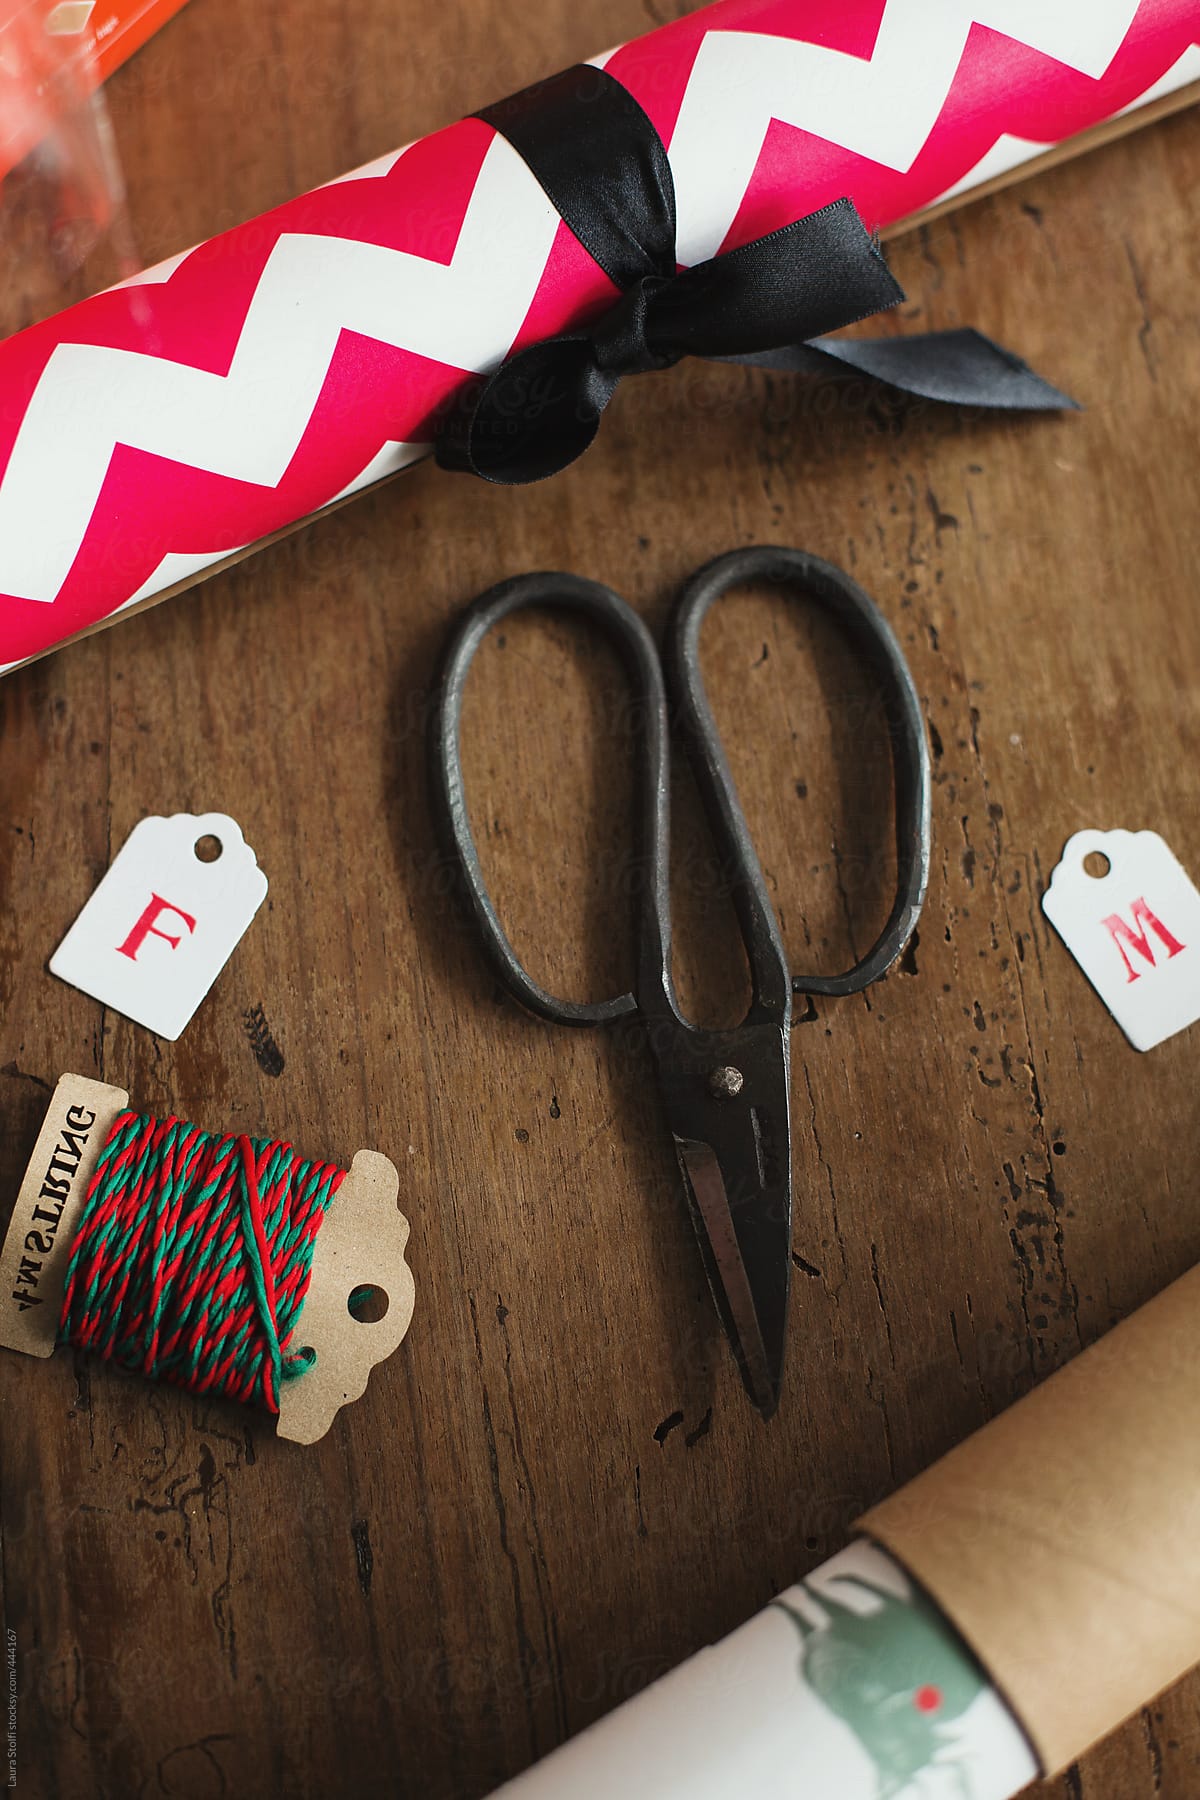 Overhead shot of Christmas wrapping paper, tags, scissors and twines